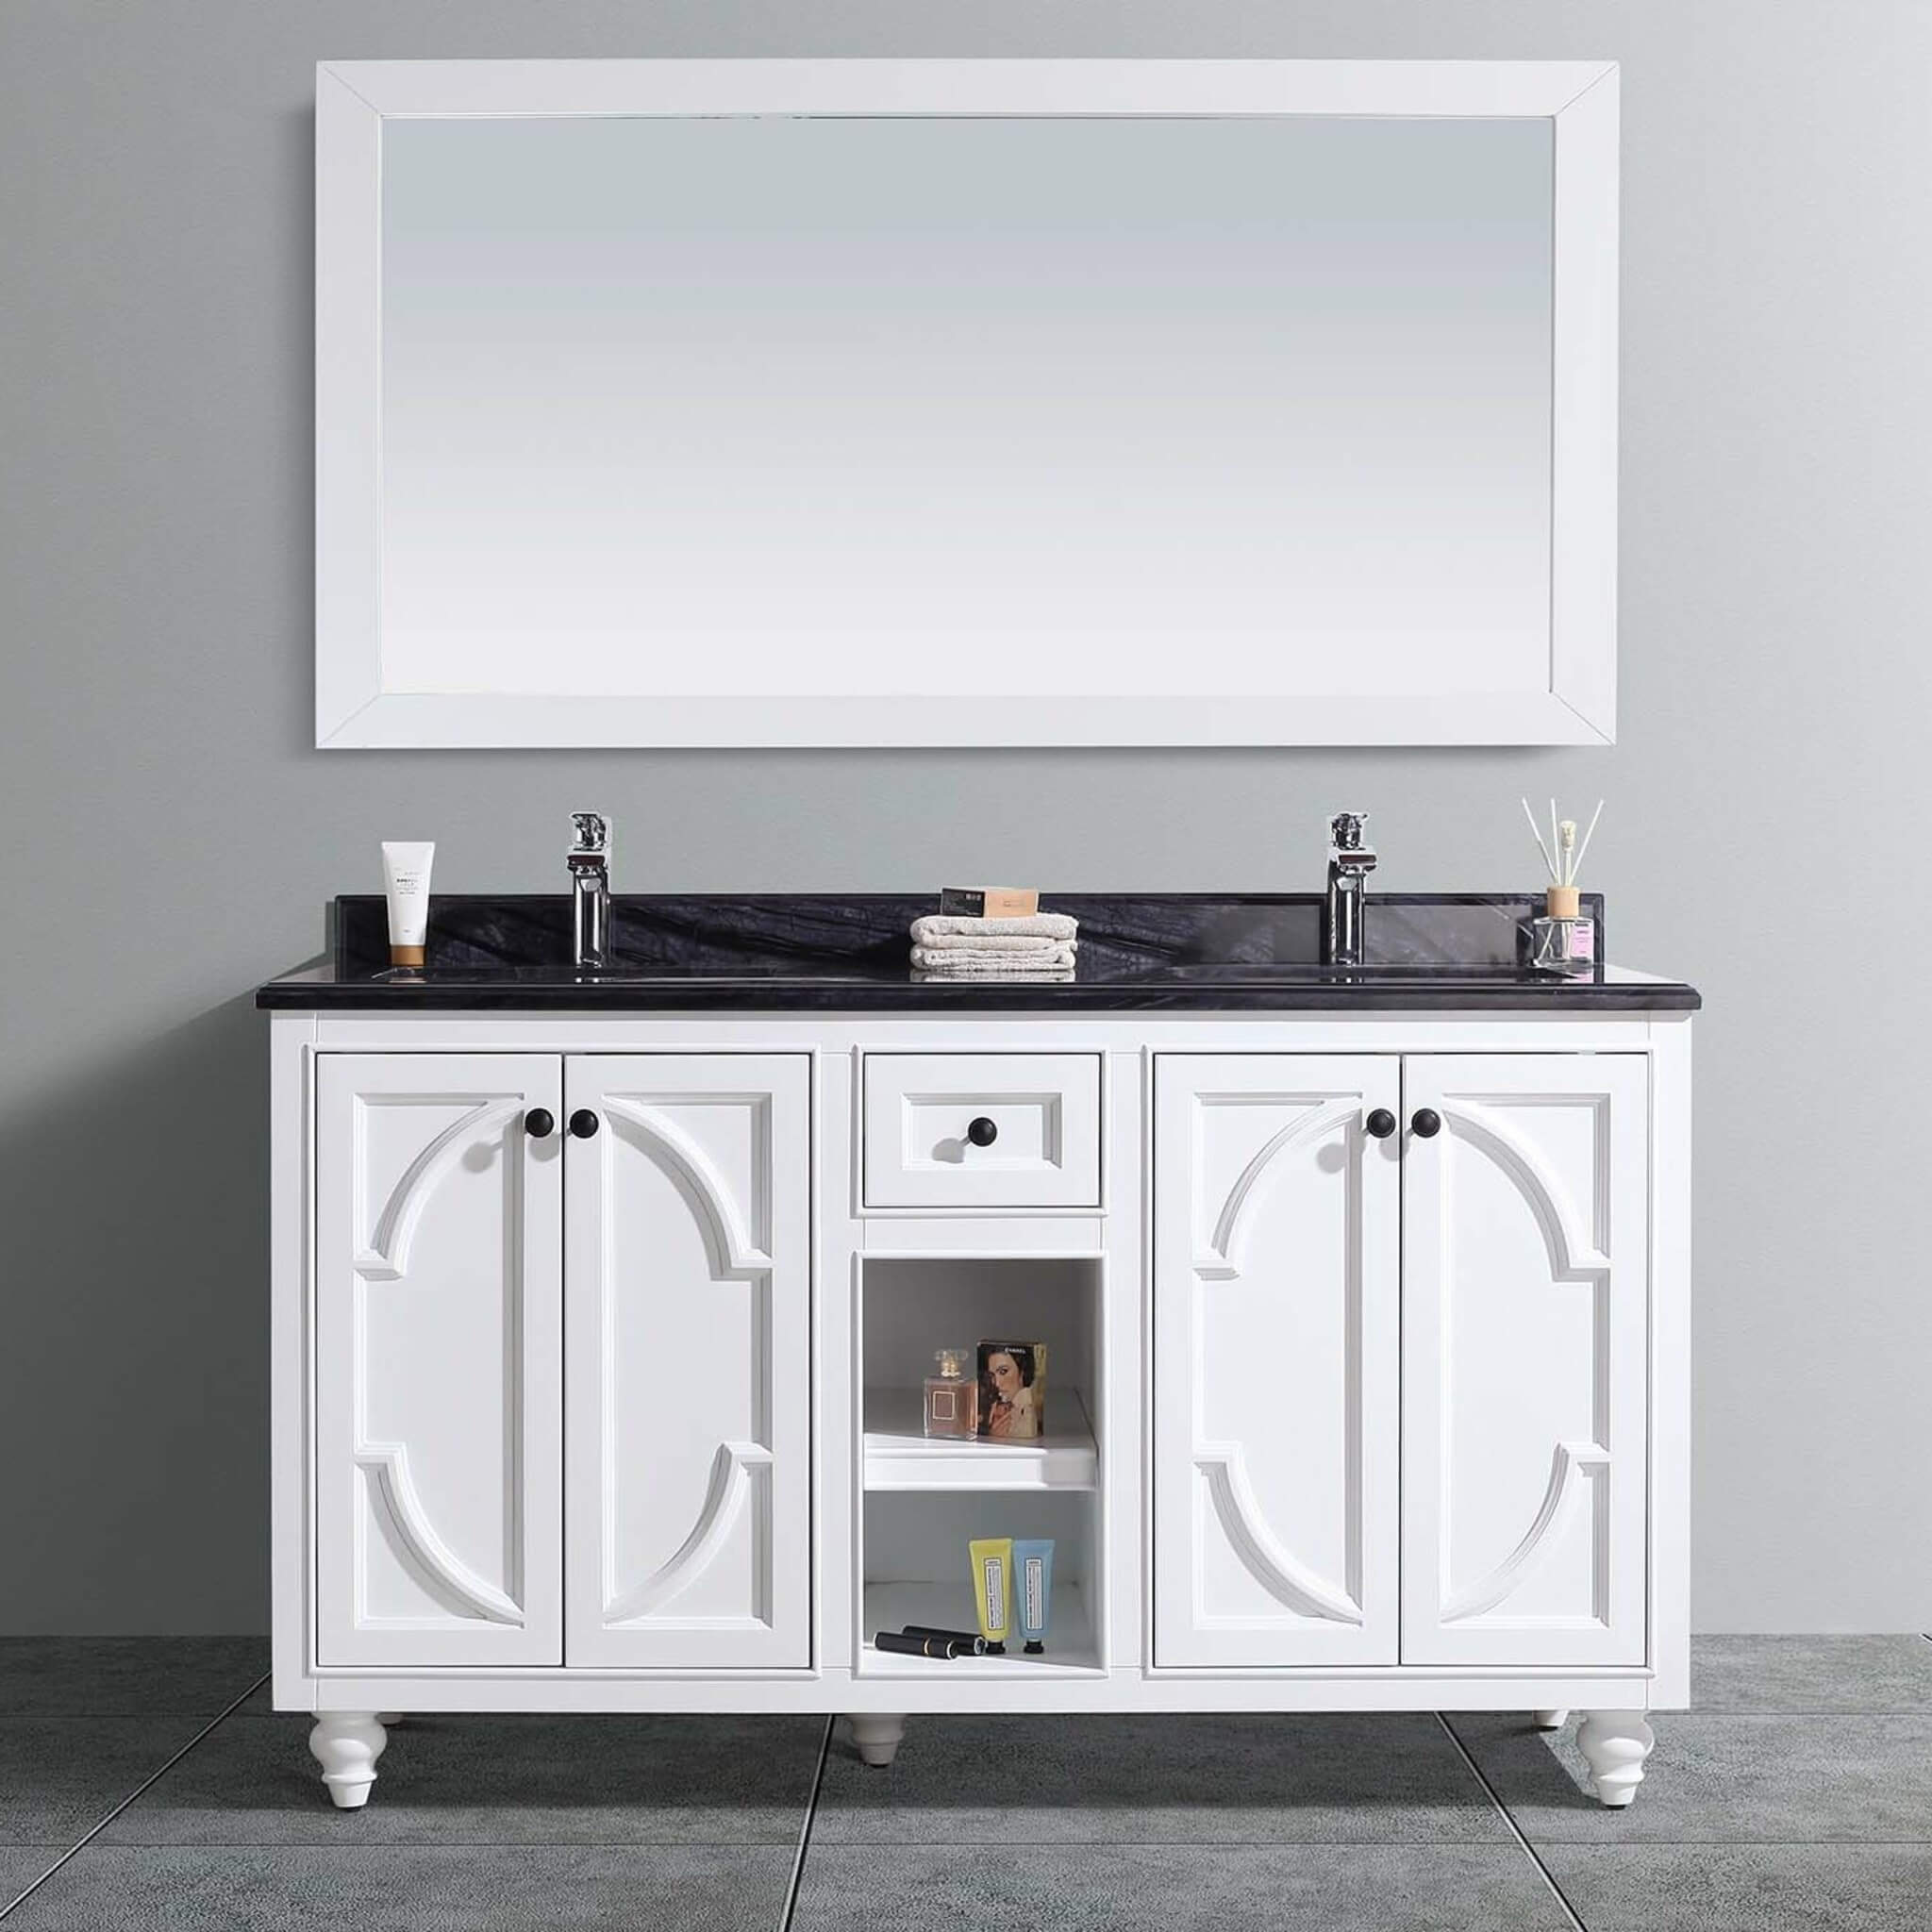 LAVIVA Odyssey 313613-60W-BW 60" Double Bathroom Vanity in White with Black Wood Marble, White Rectangle Sinks, Front View